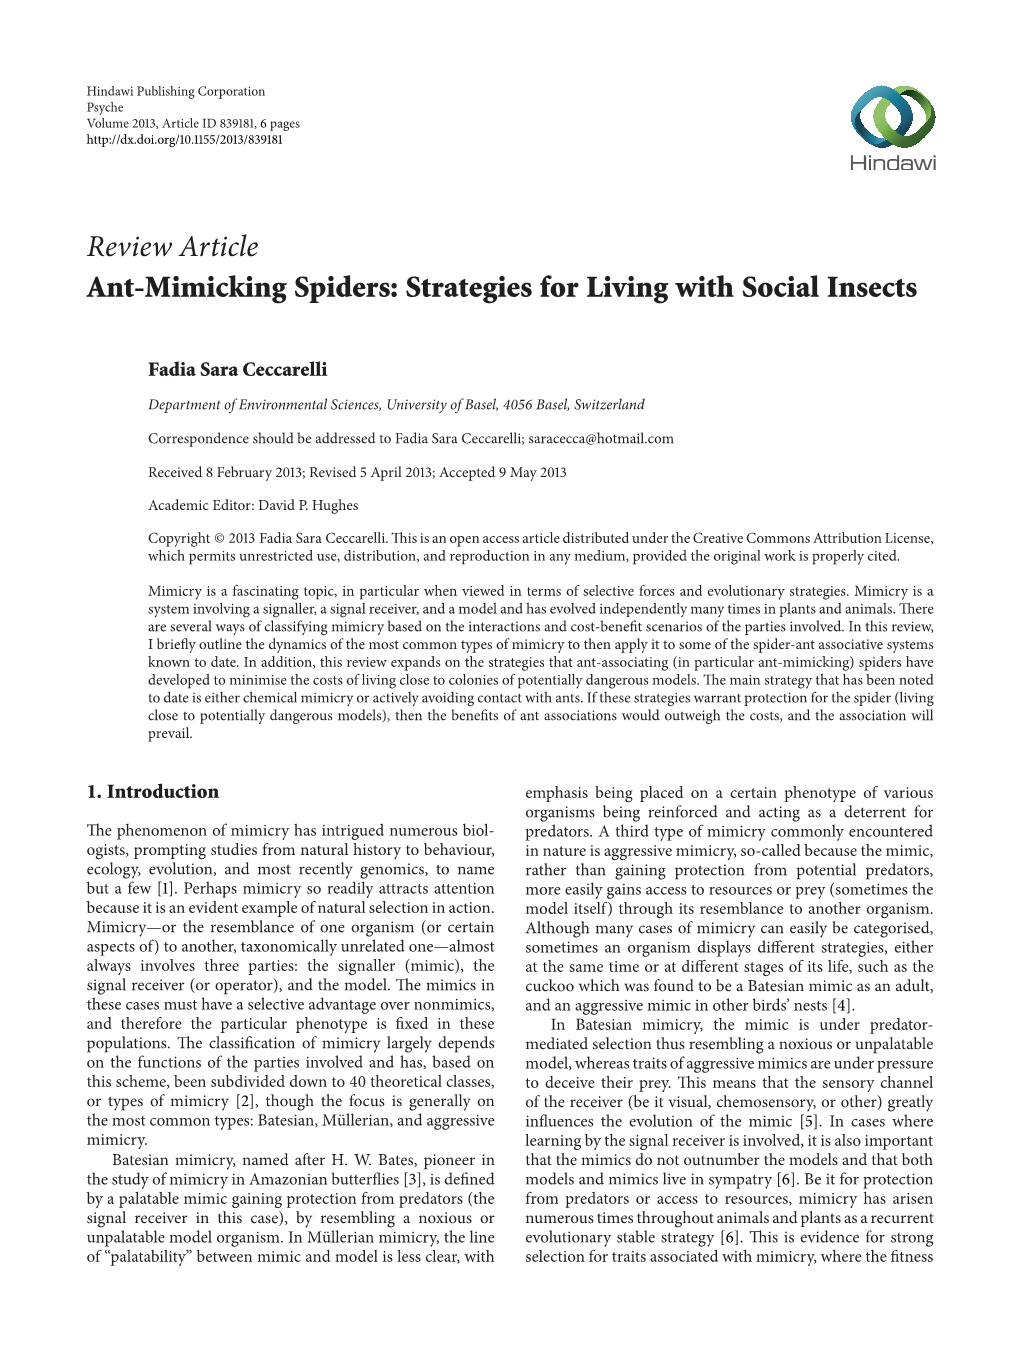 Review Article Ant-Mimicking Spiders: Strategies for Living with Social Insects